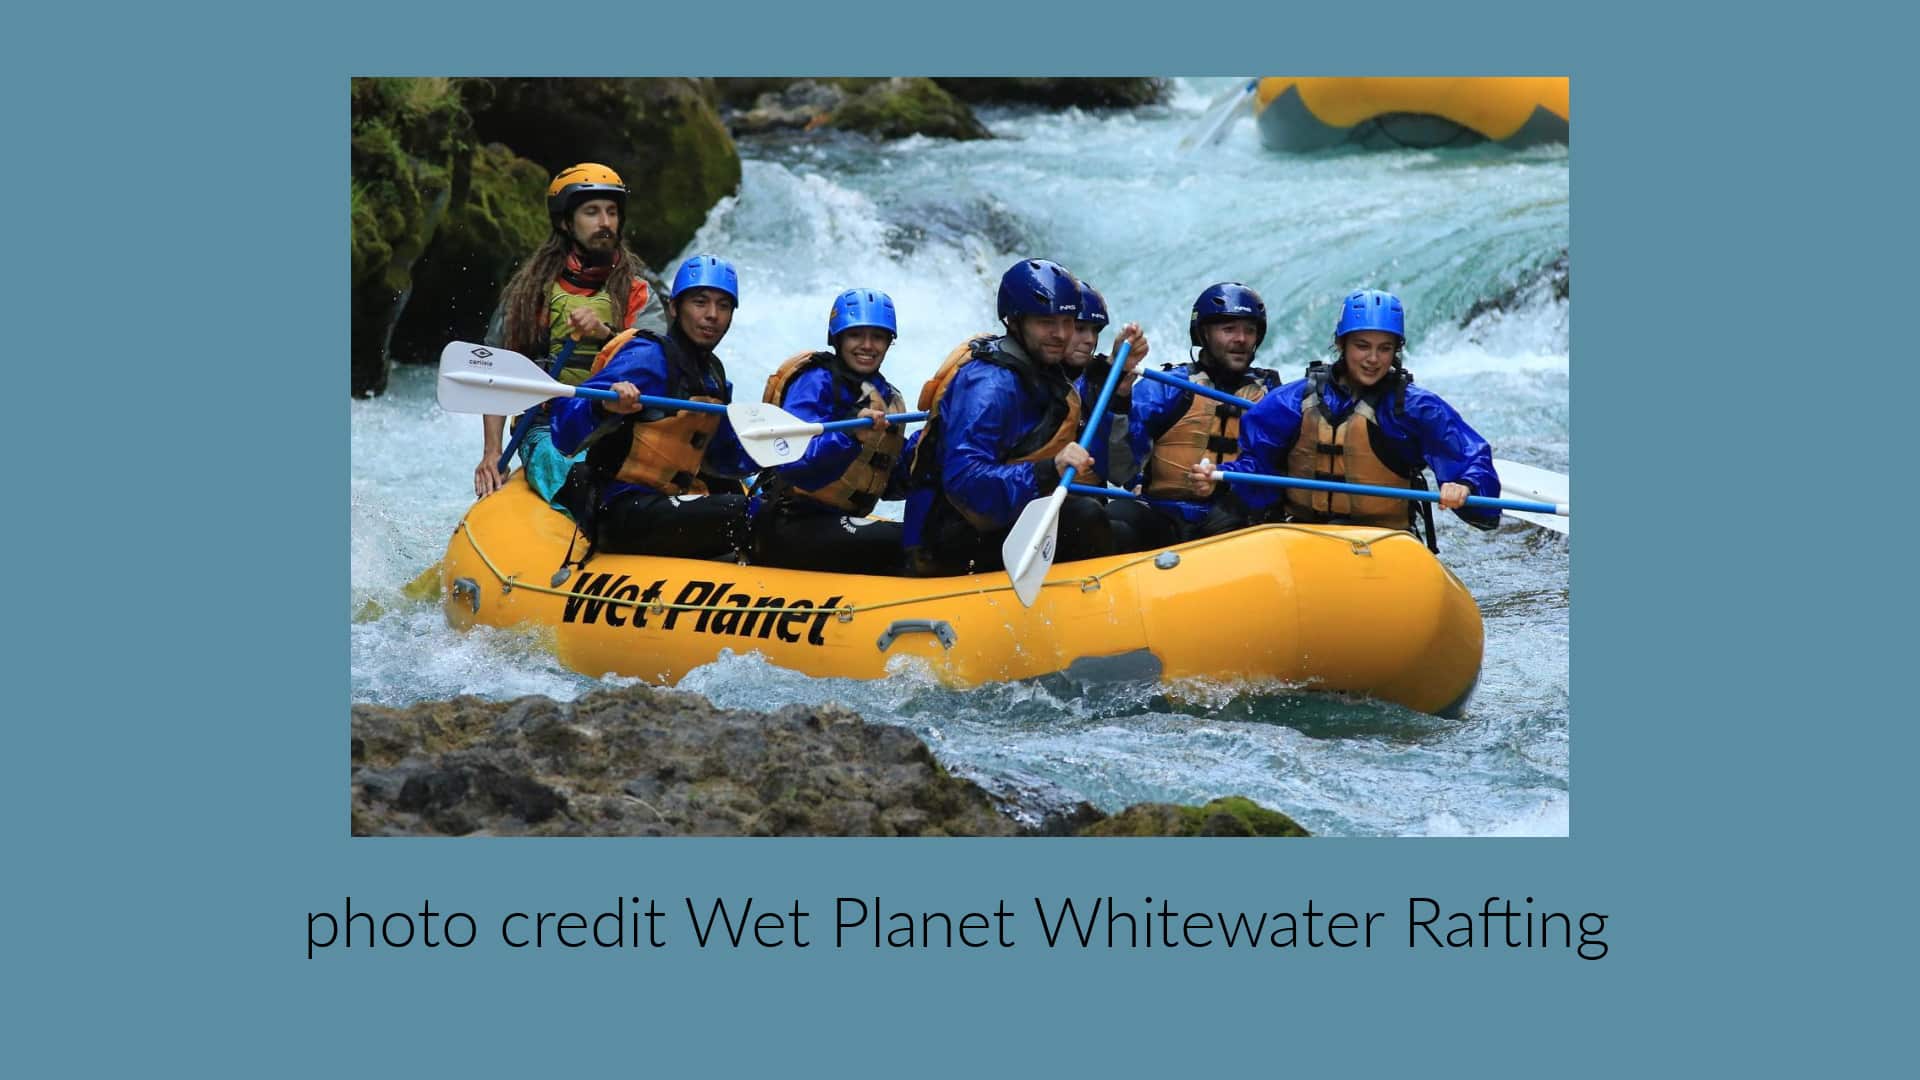 White water rafting on with Wet Planet Whitewater